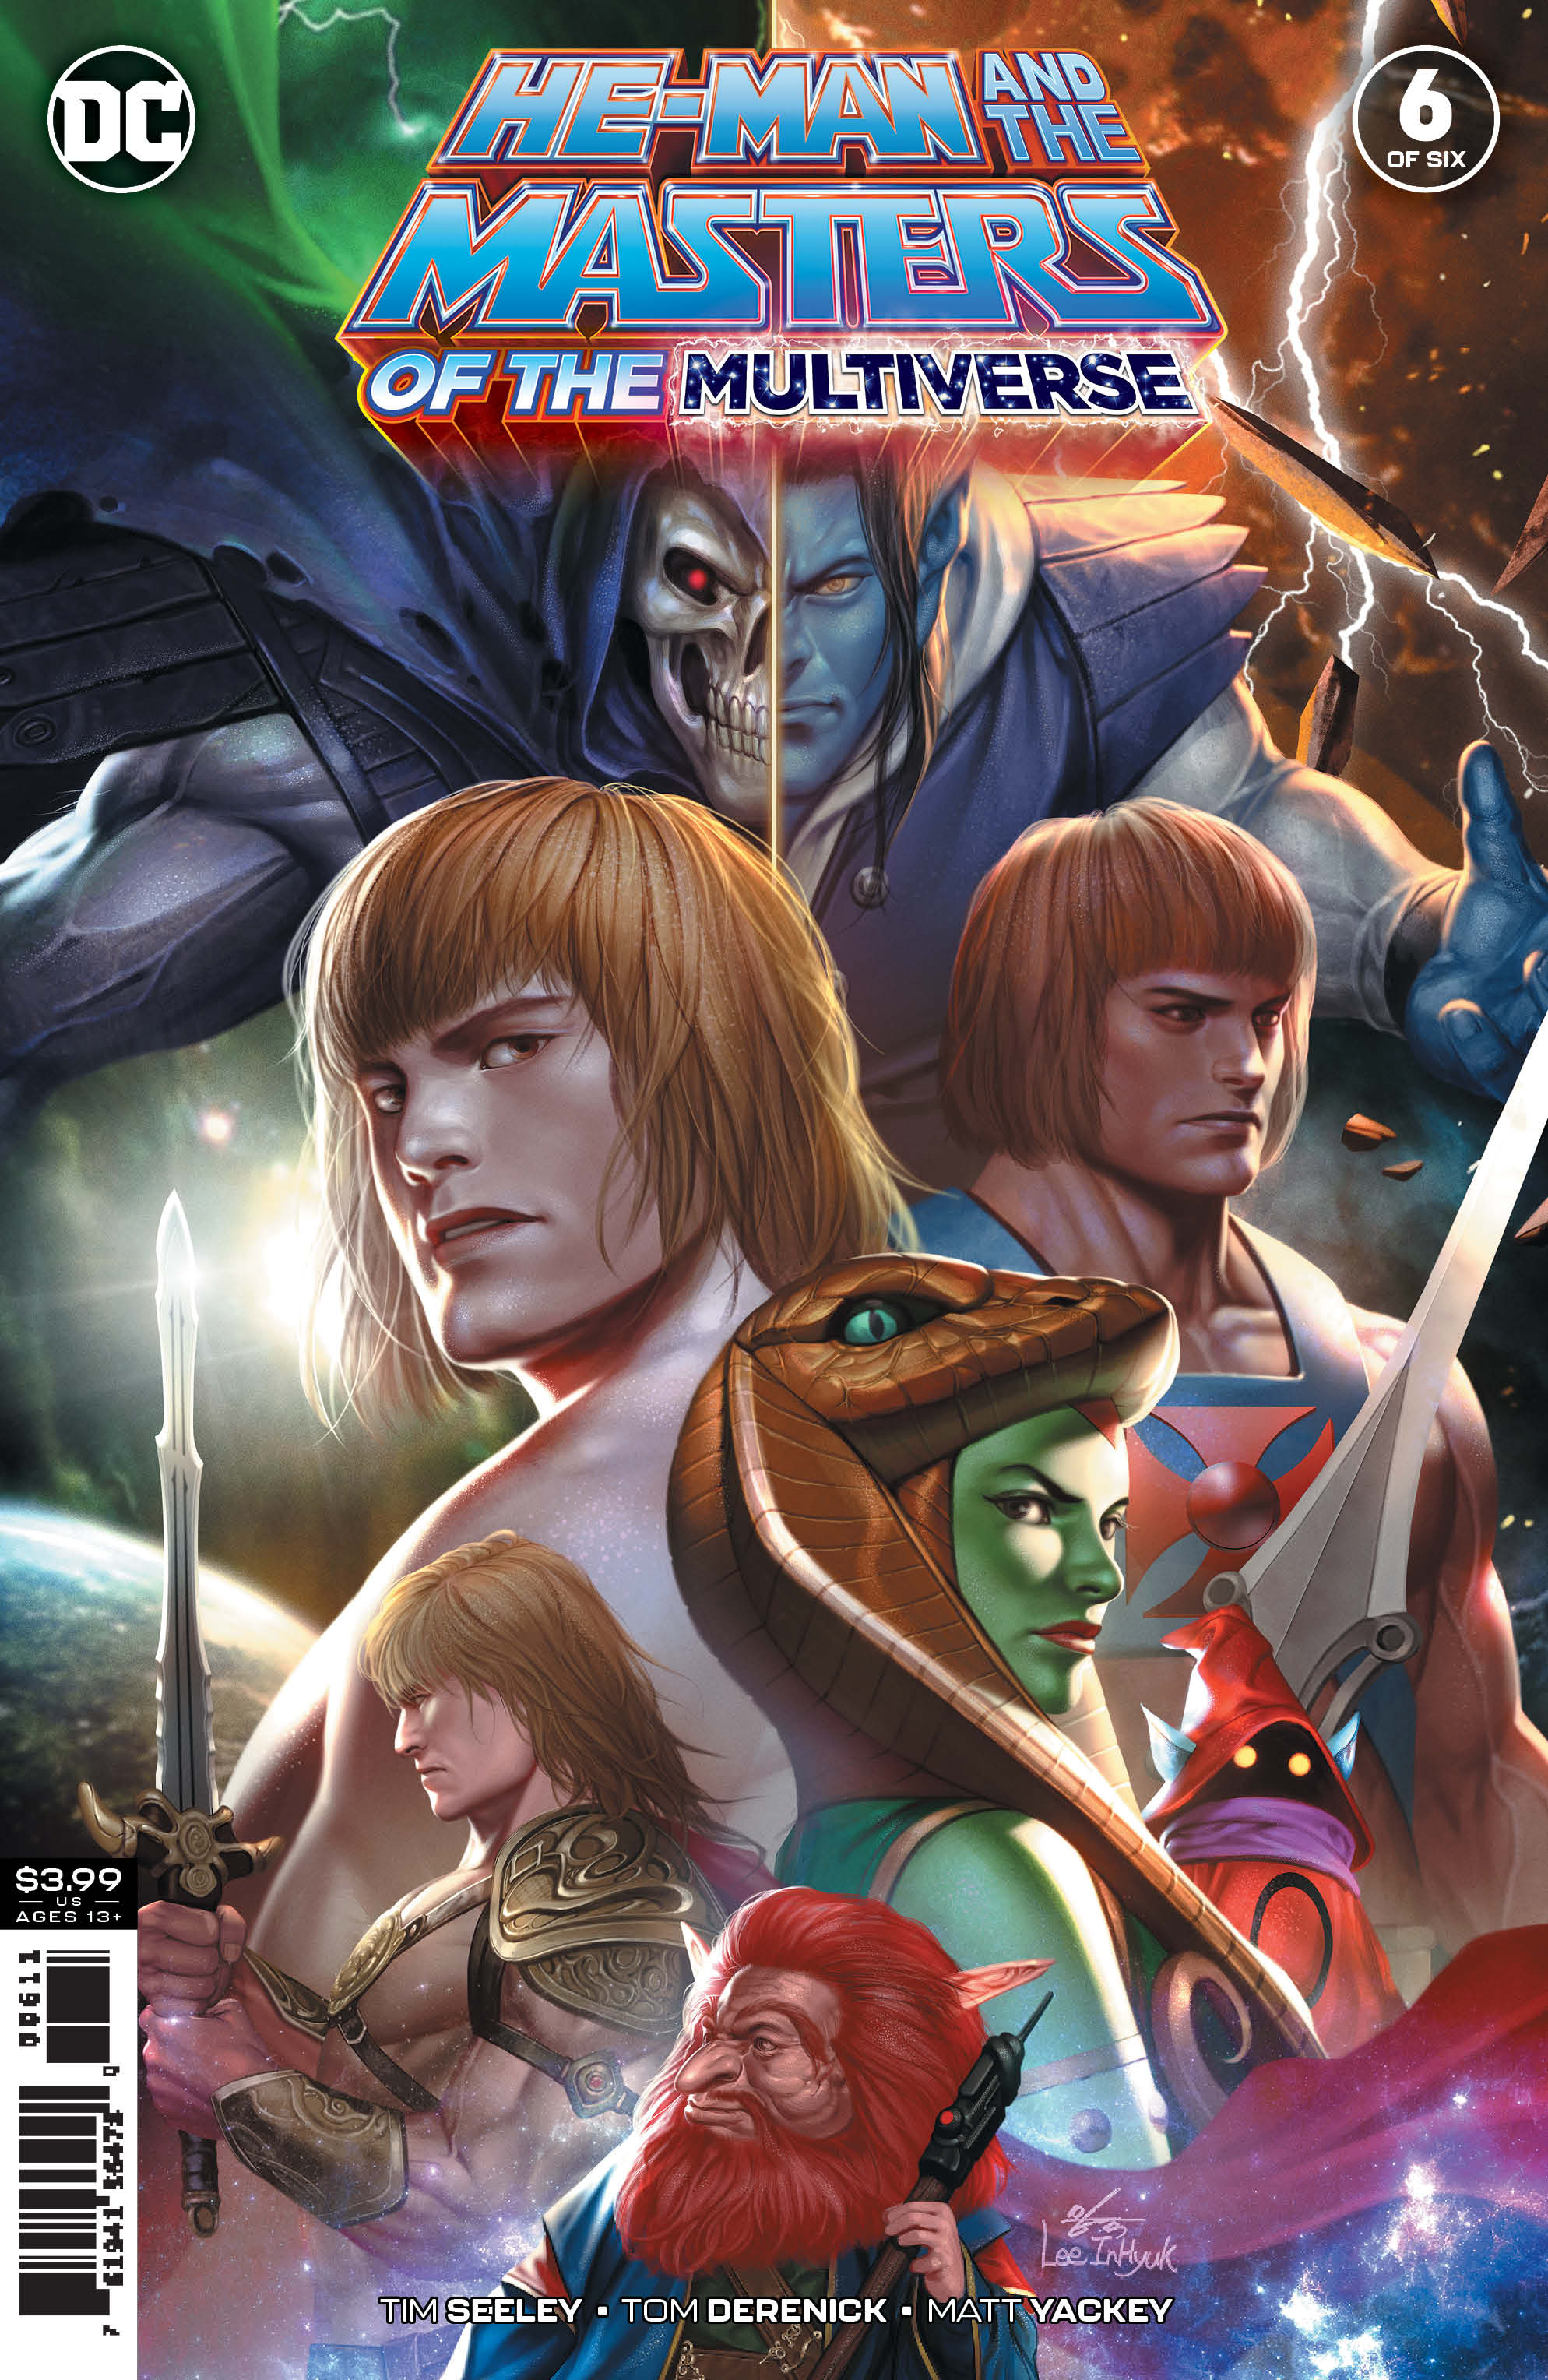 HE-MAN & THE MASTERS OF THE MULTIVERSE #6c